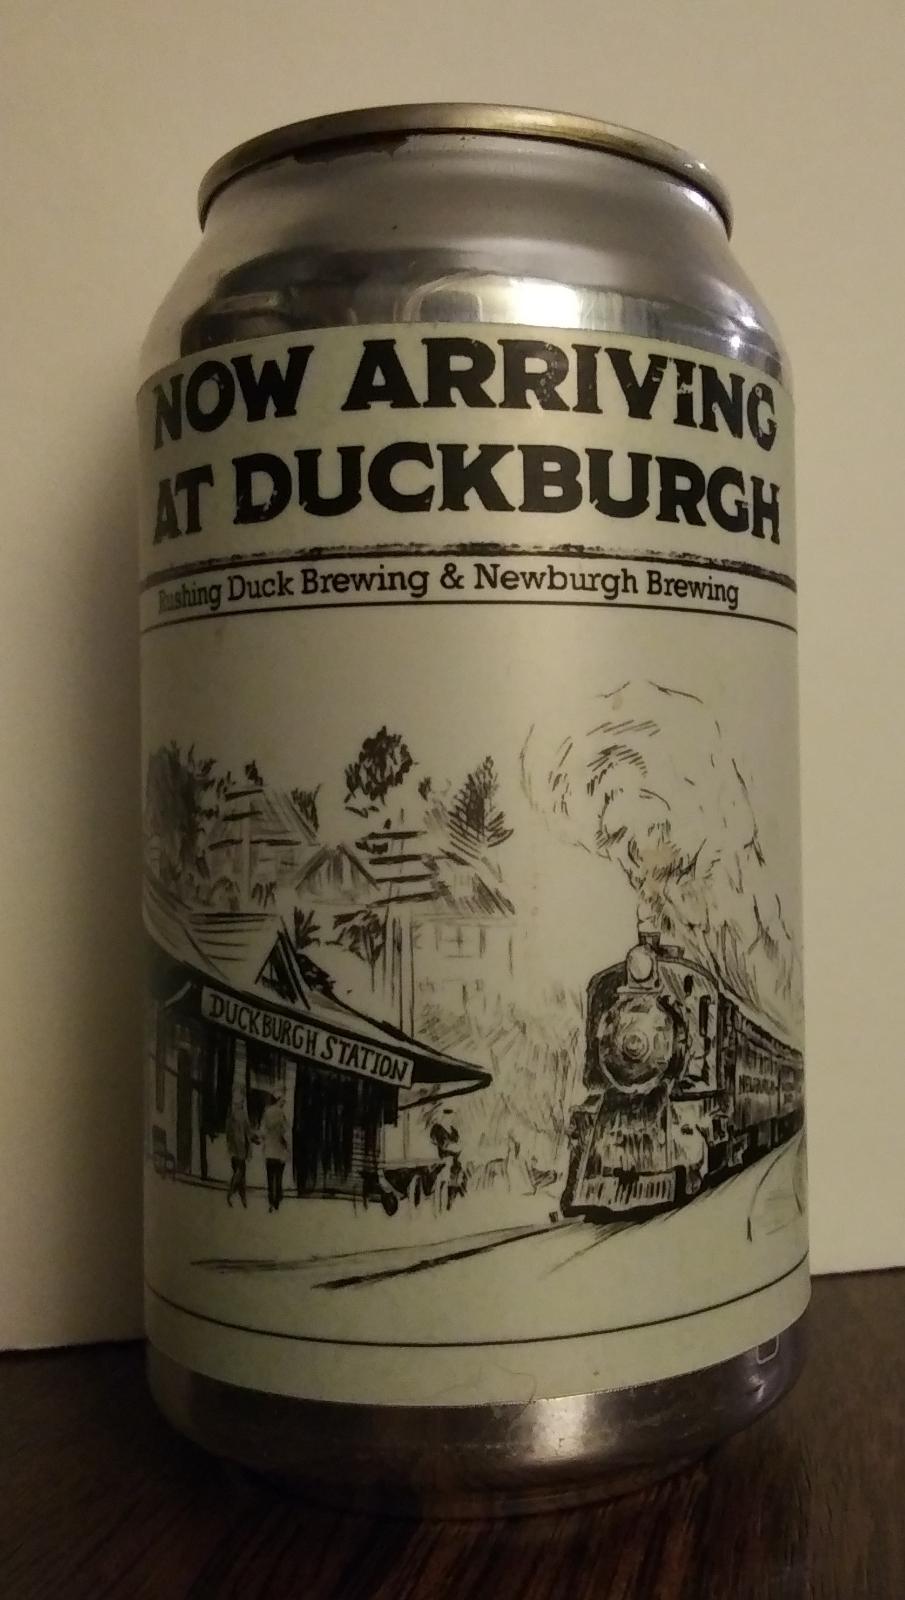 Now Arriving At Duckburgh (Collaboration with Newburgh Brewing Company)